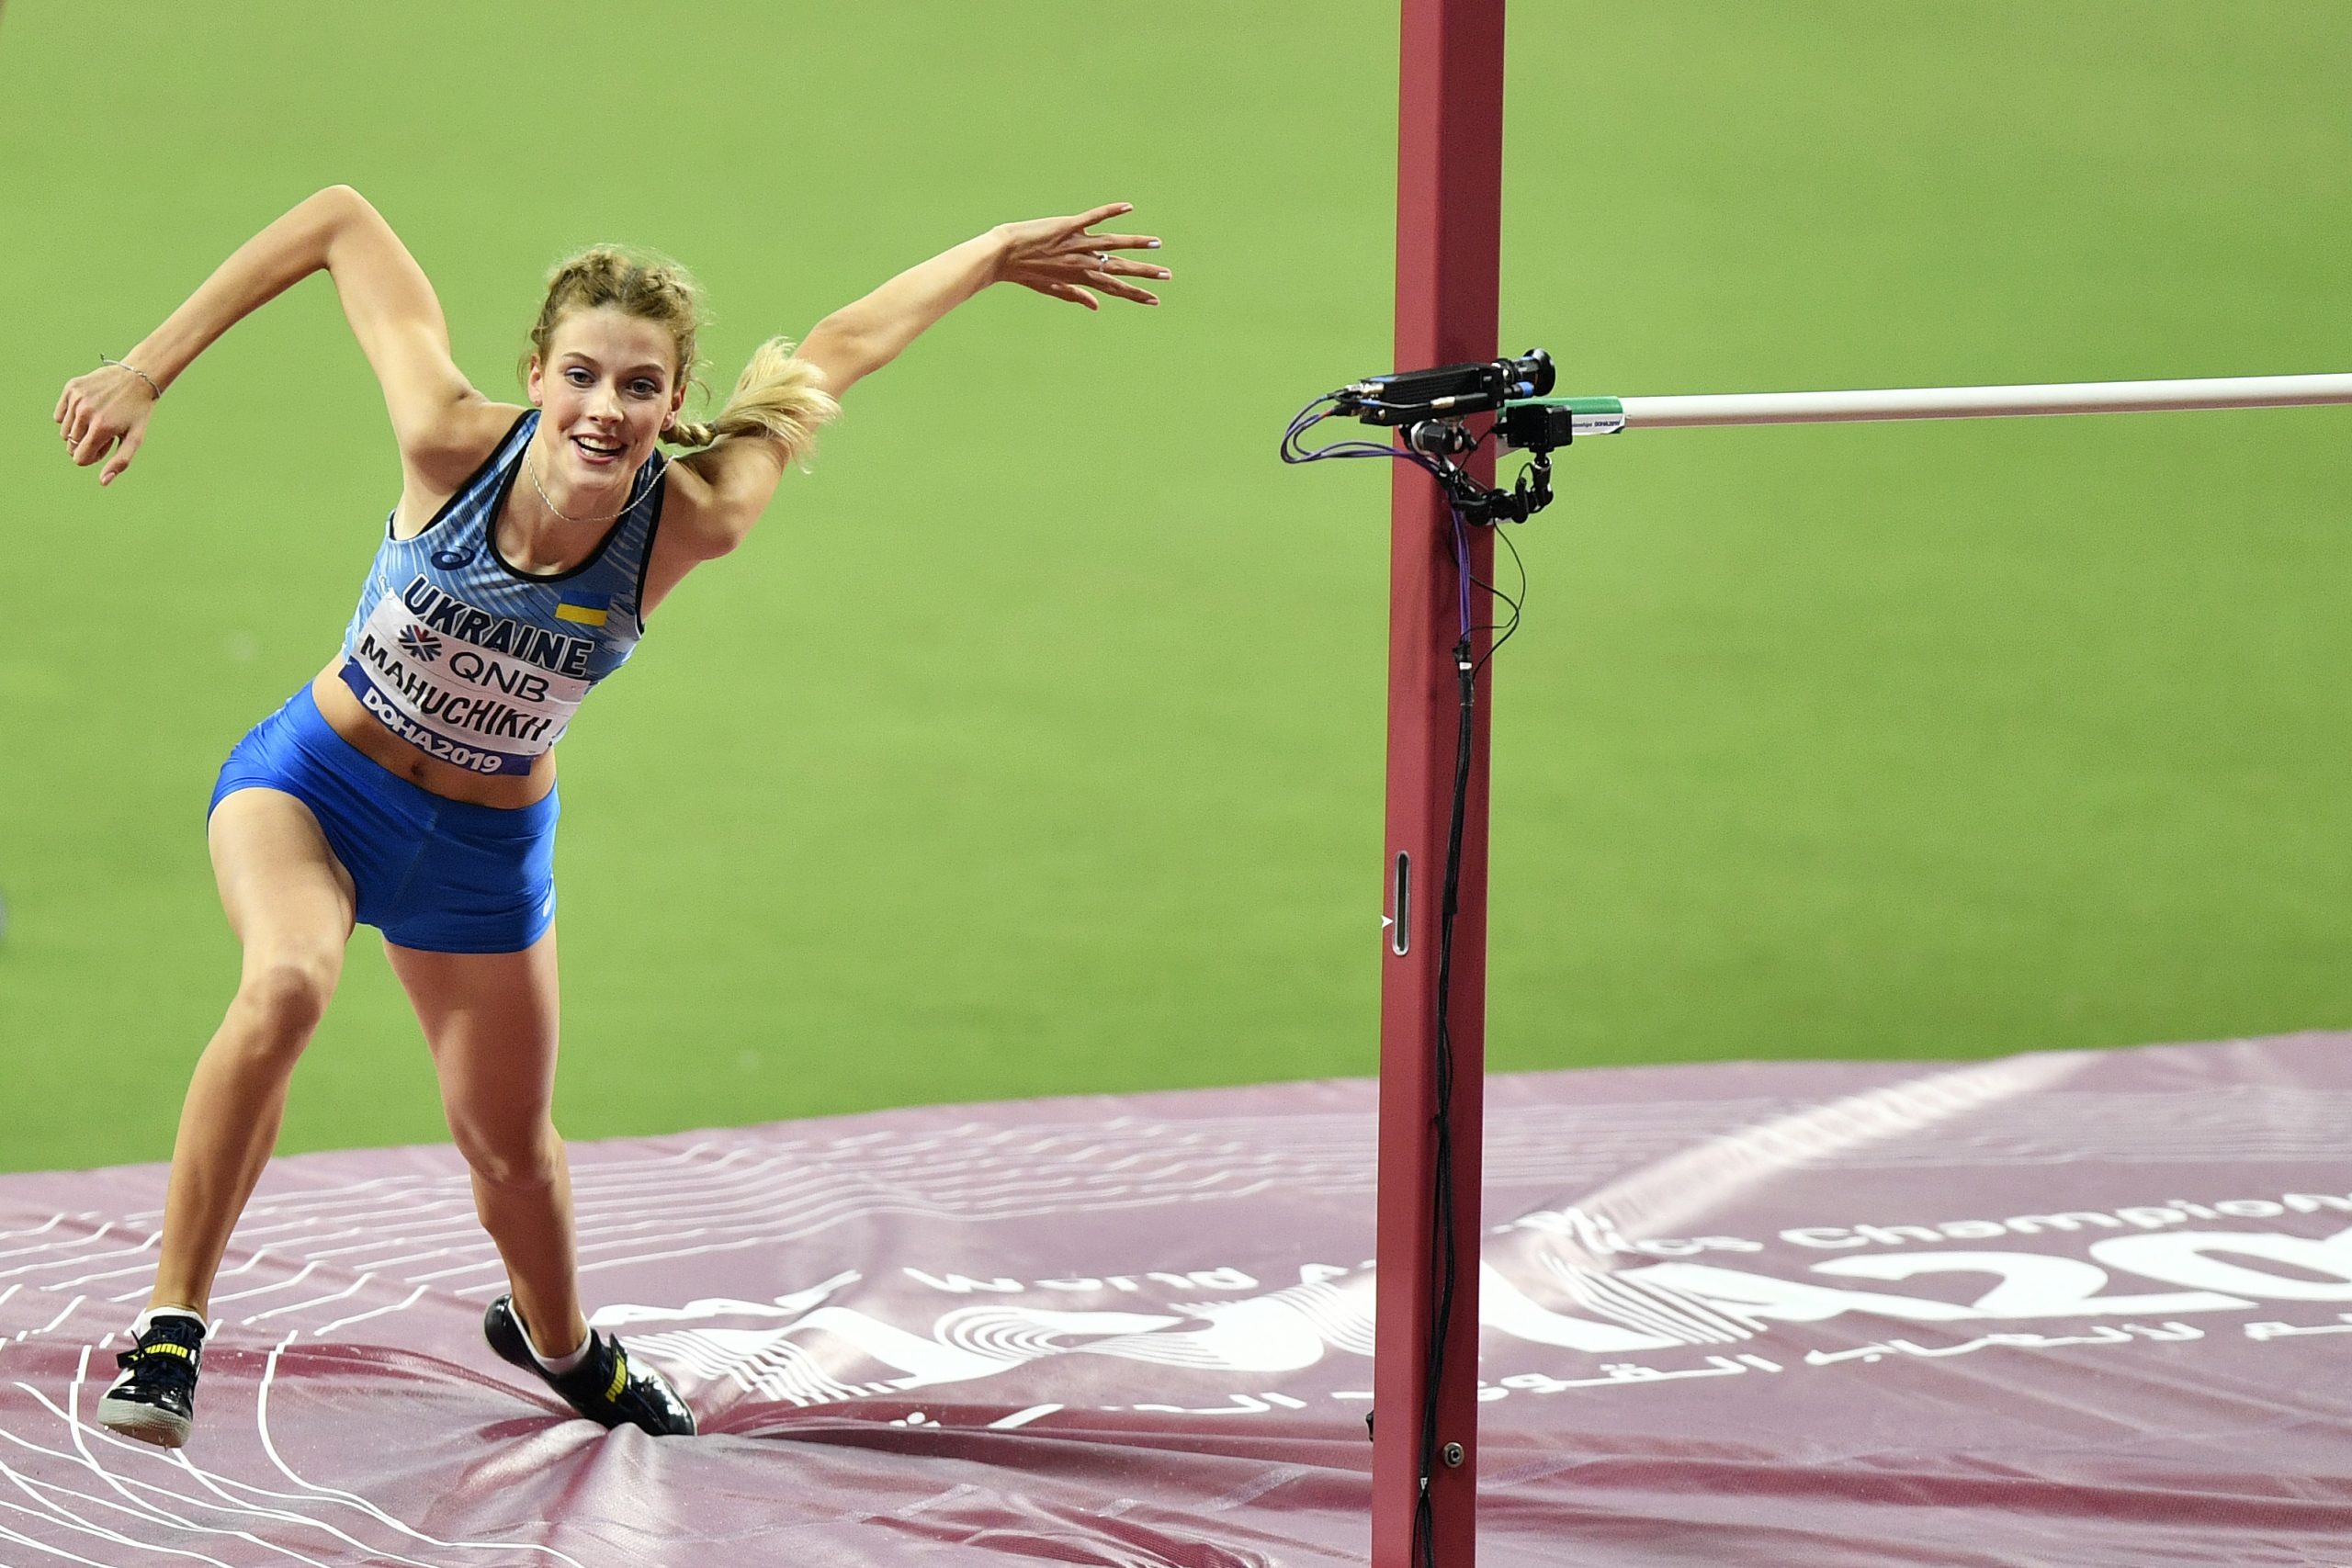 Yaroslava Mahuchikh, of Ukraine, reacts after an attempt in the women's high jump final during the World Athletics Championships in Doha, Qatar, Monday, Sept. 30, 2019. (AP Photo/Martin Meissner)